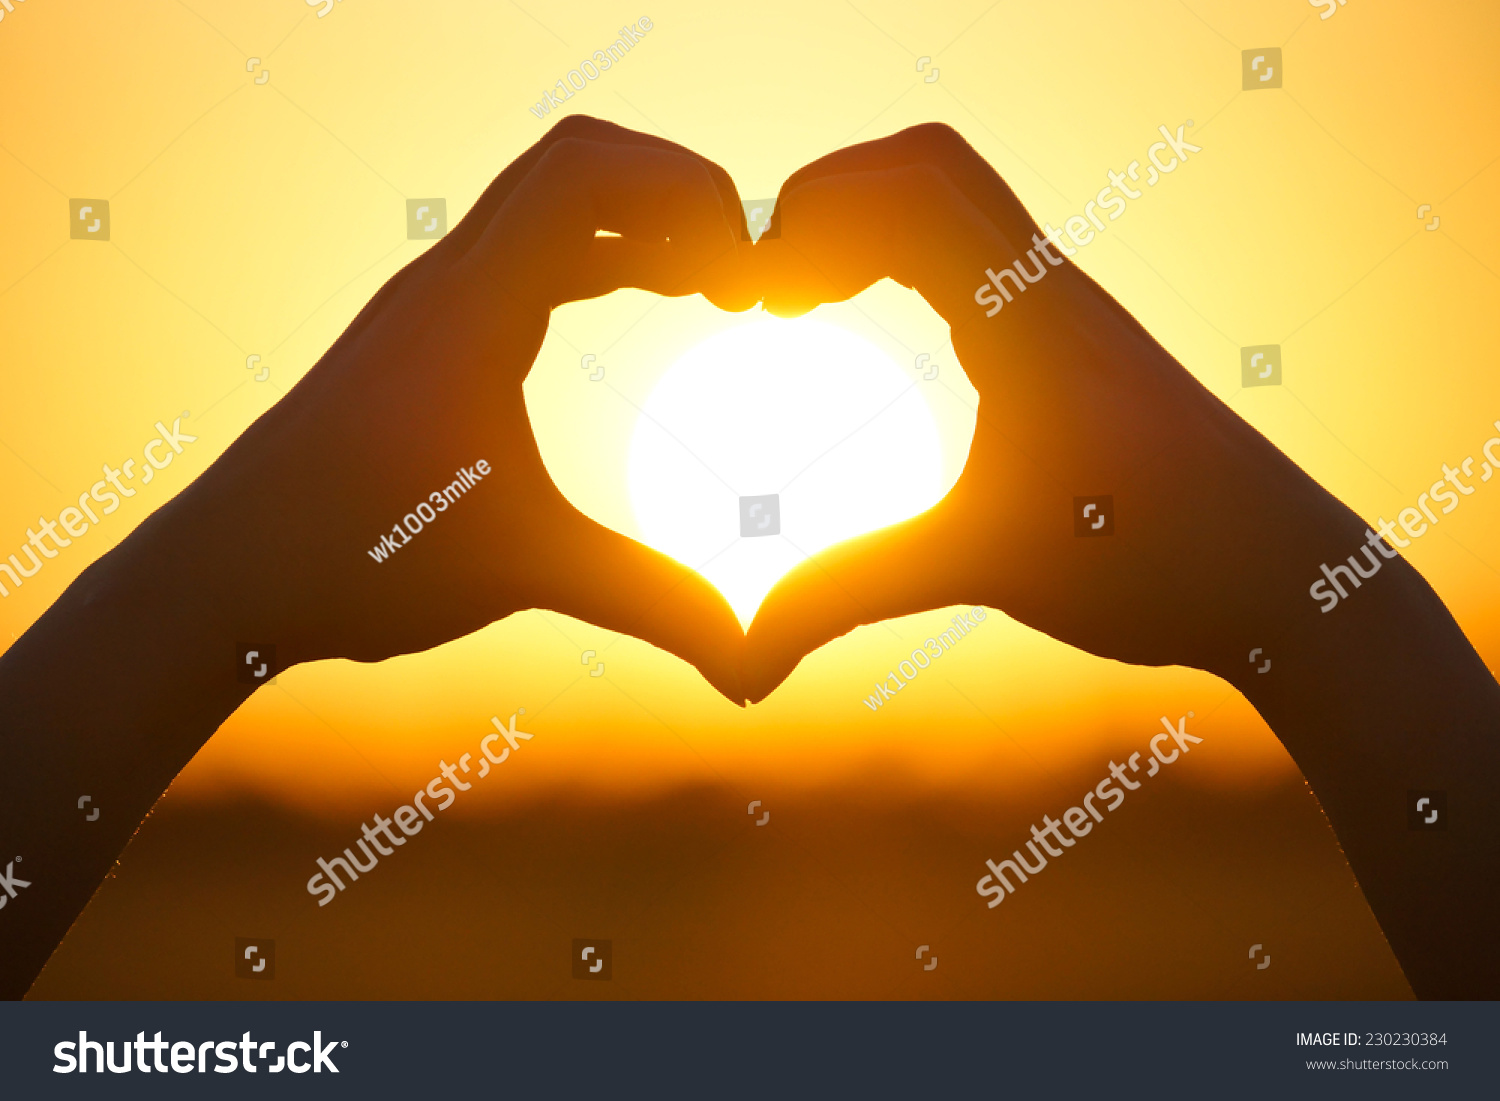 hands-forming-a-heart-shape-with-sunset-silhouette-stock-photo